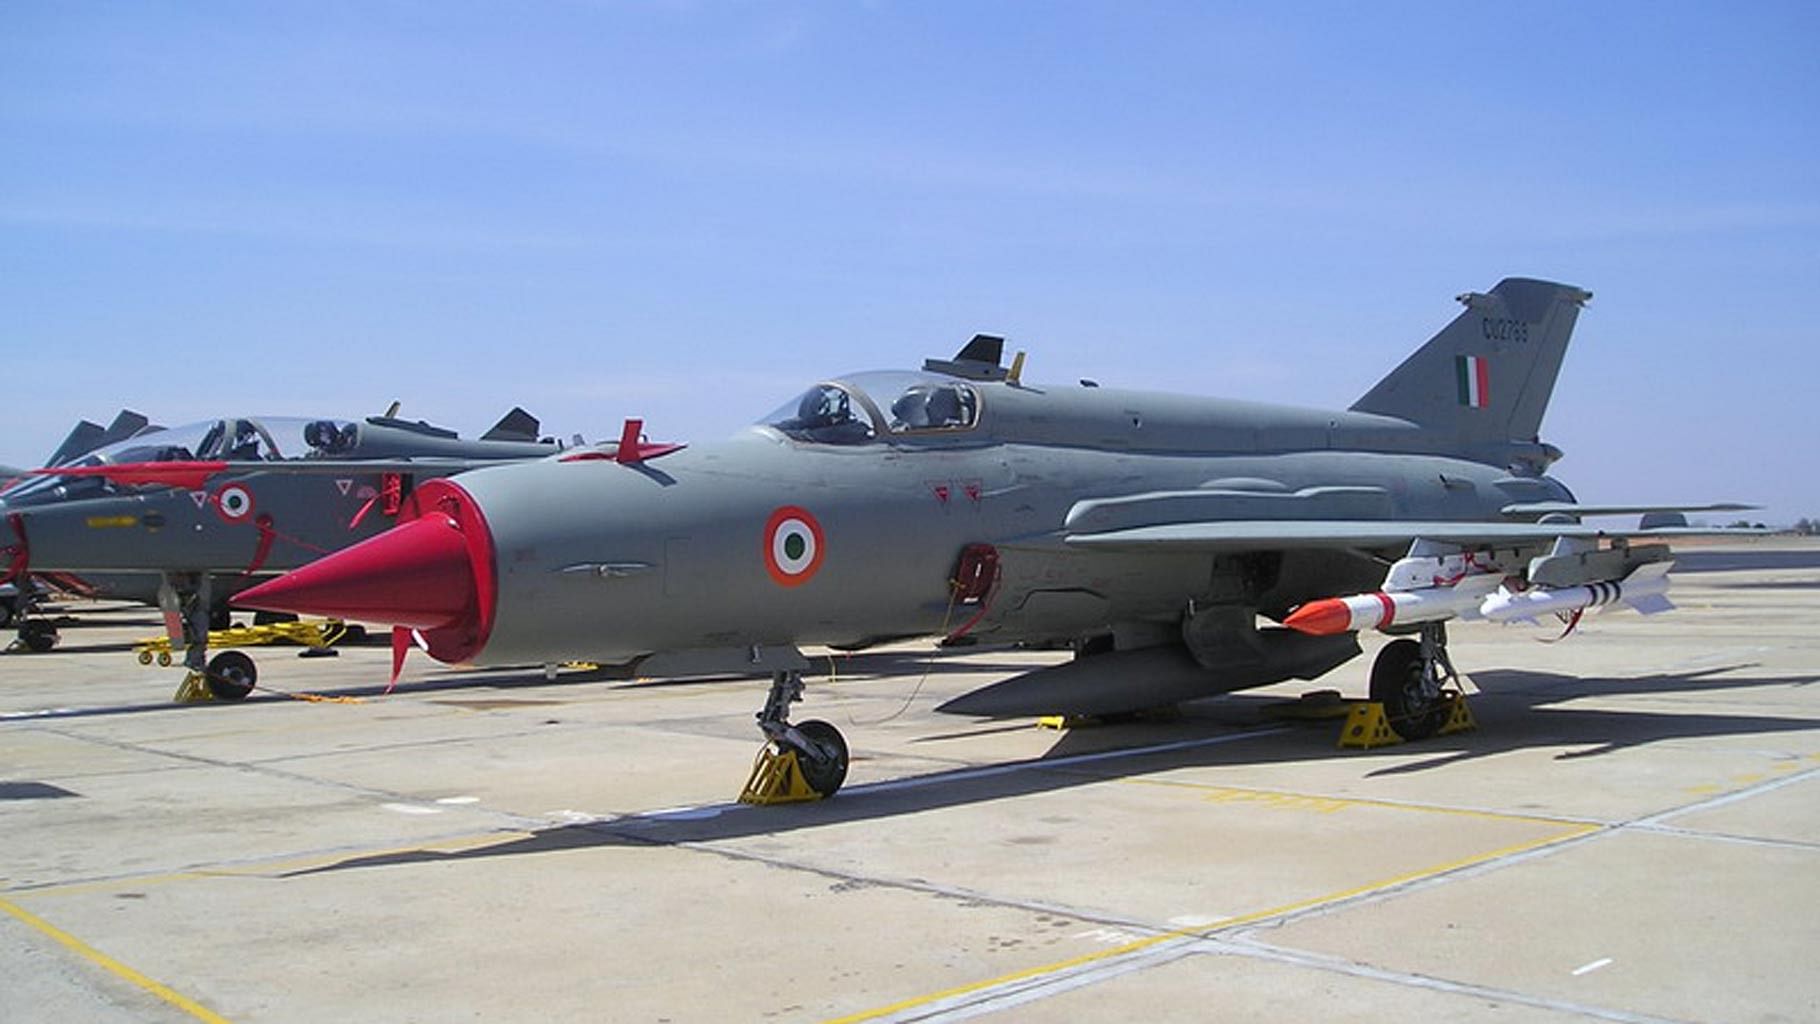 Progressive phase out of IAF’s workhorse, the Mig 21 fleet, has resulted in the draw-down of its combat strength from 40 squadrons to 33 today. (Photo: <a href="https://commons.wikimedia.org/wiki/Main_Page">Wikimedia Commons</a>/ Altered by <b>The Quint</b>)